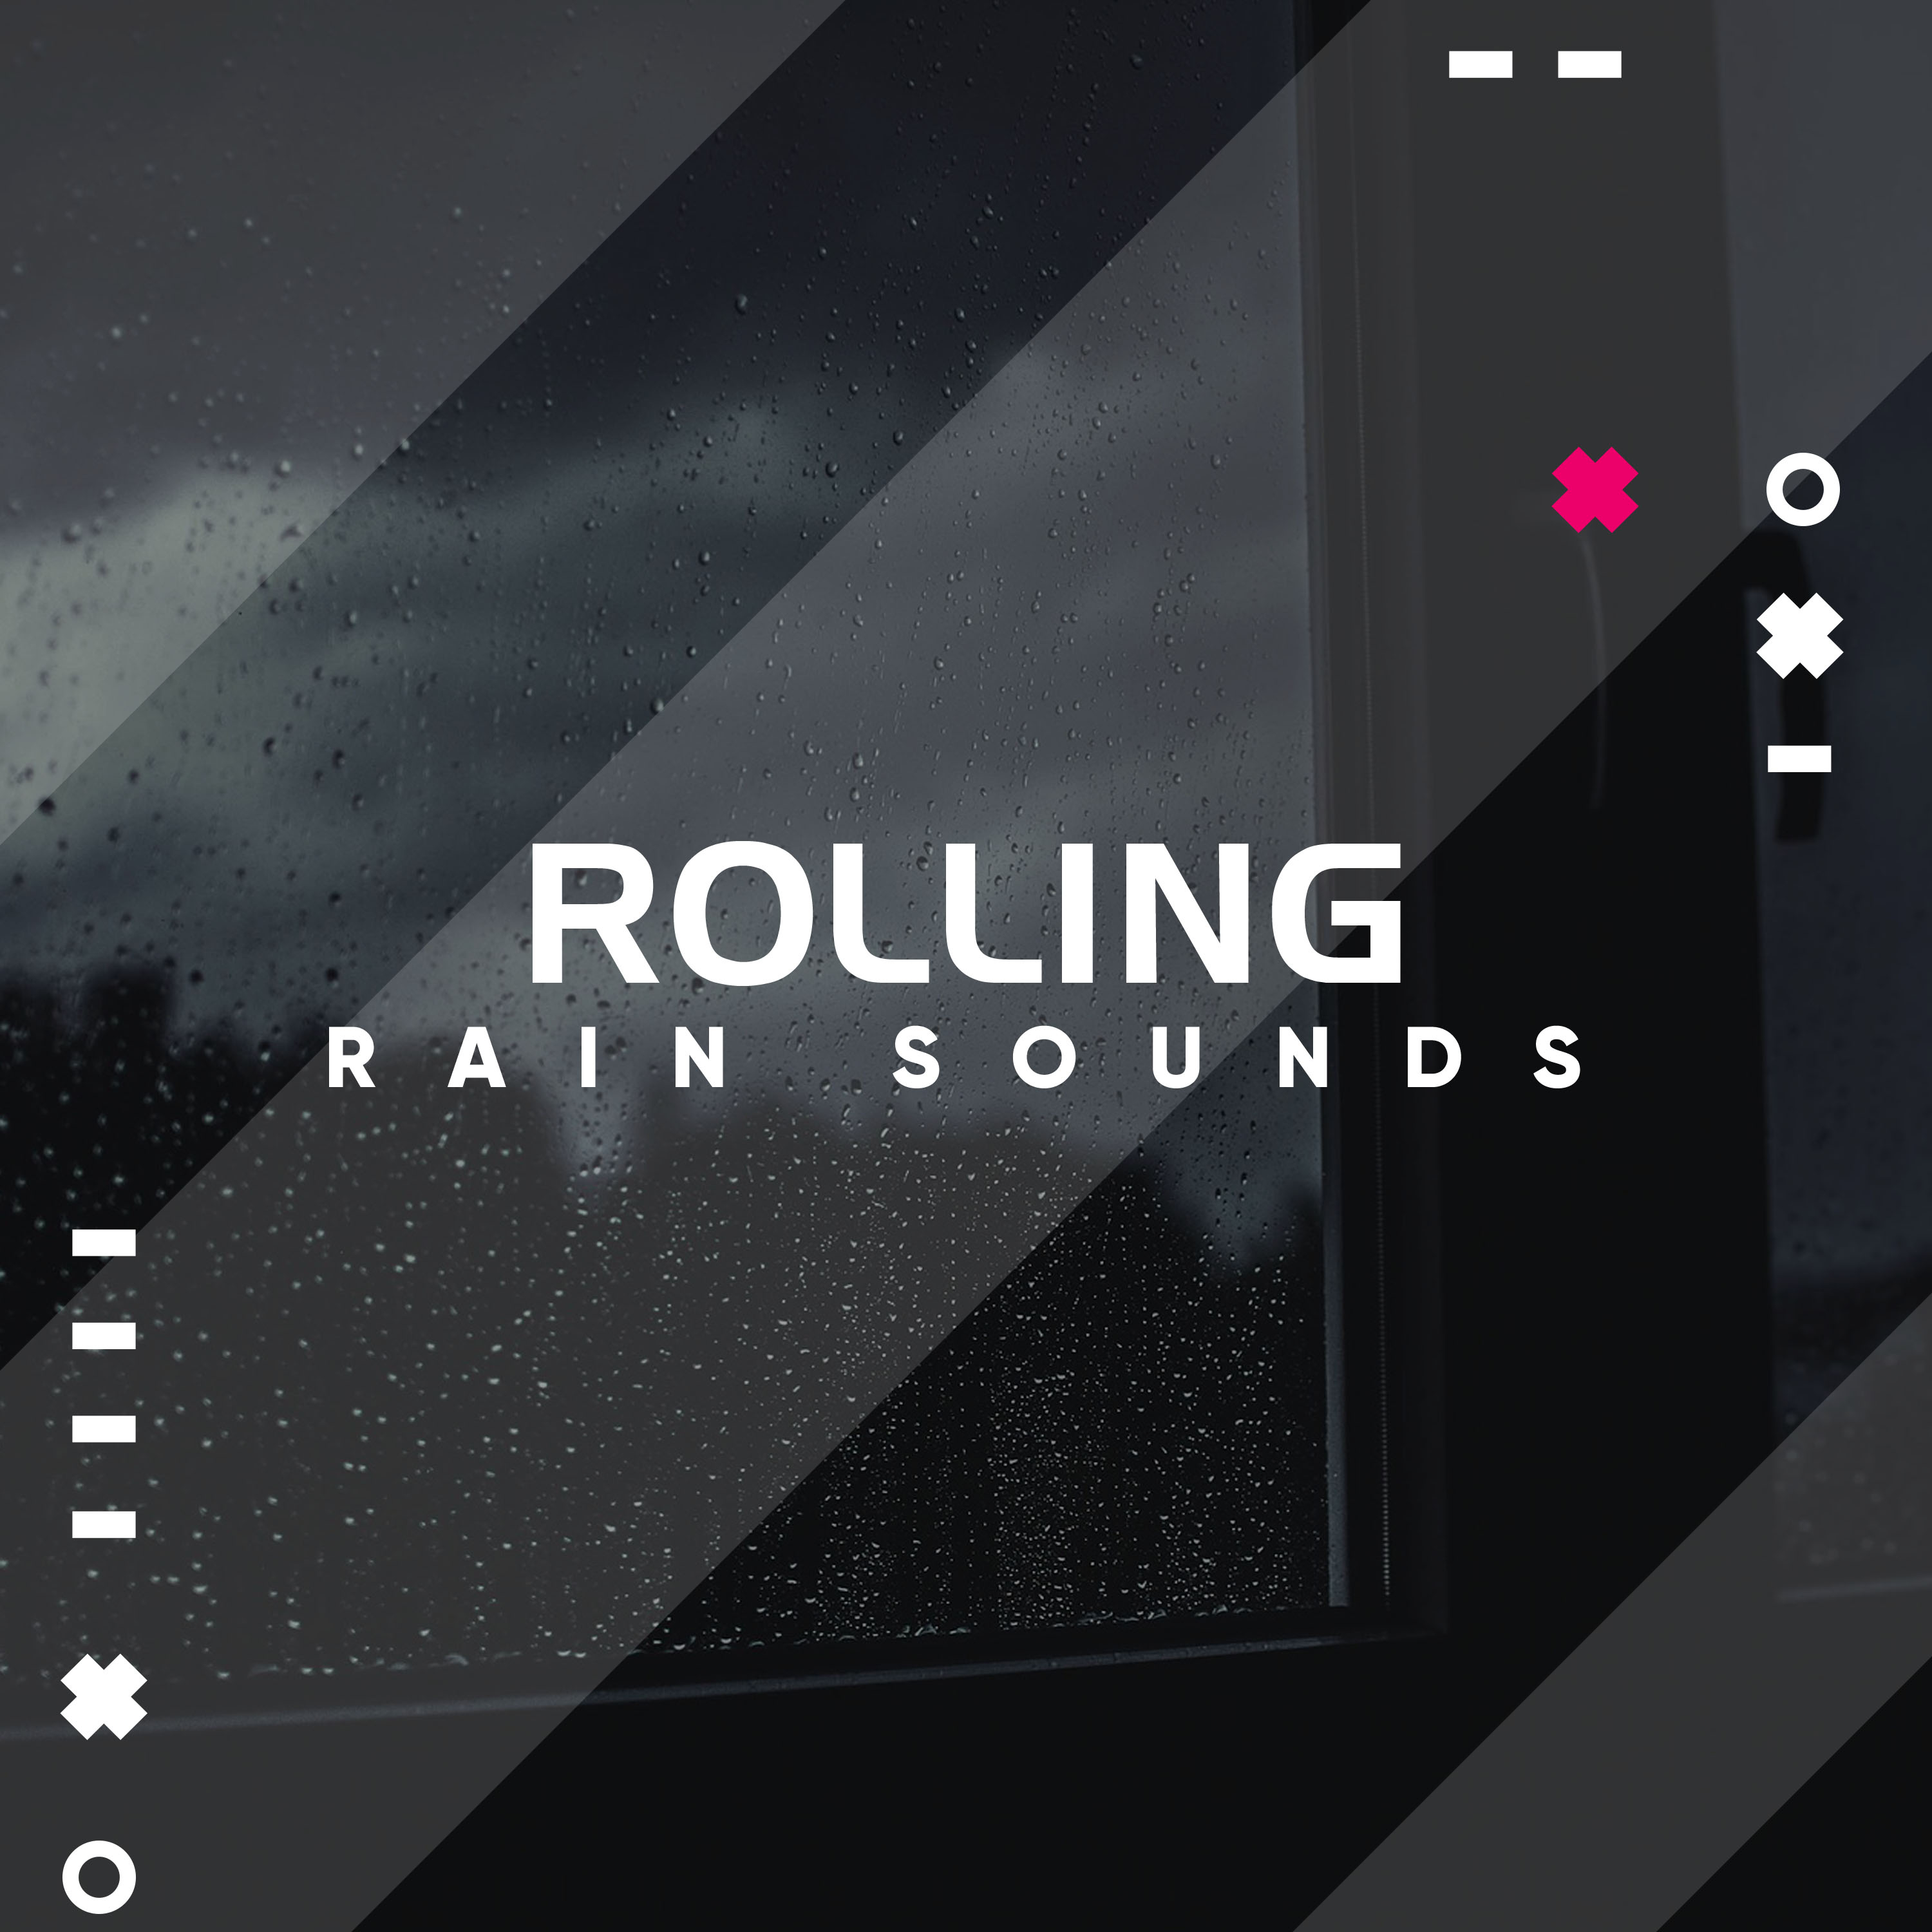 #16 Rolling Rain Sounds for Relaxation & Sleep